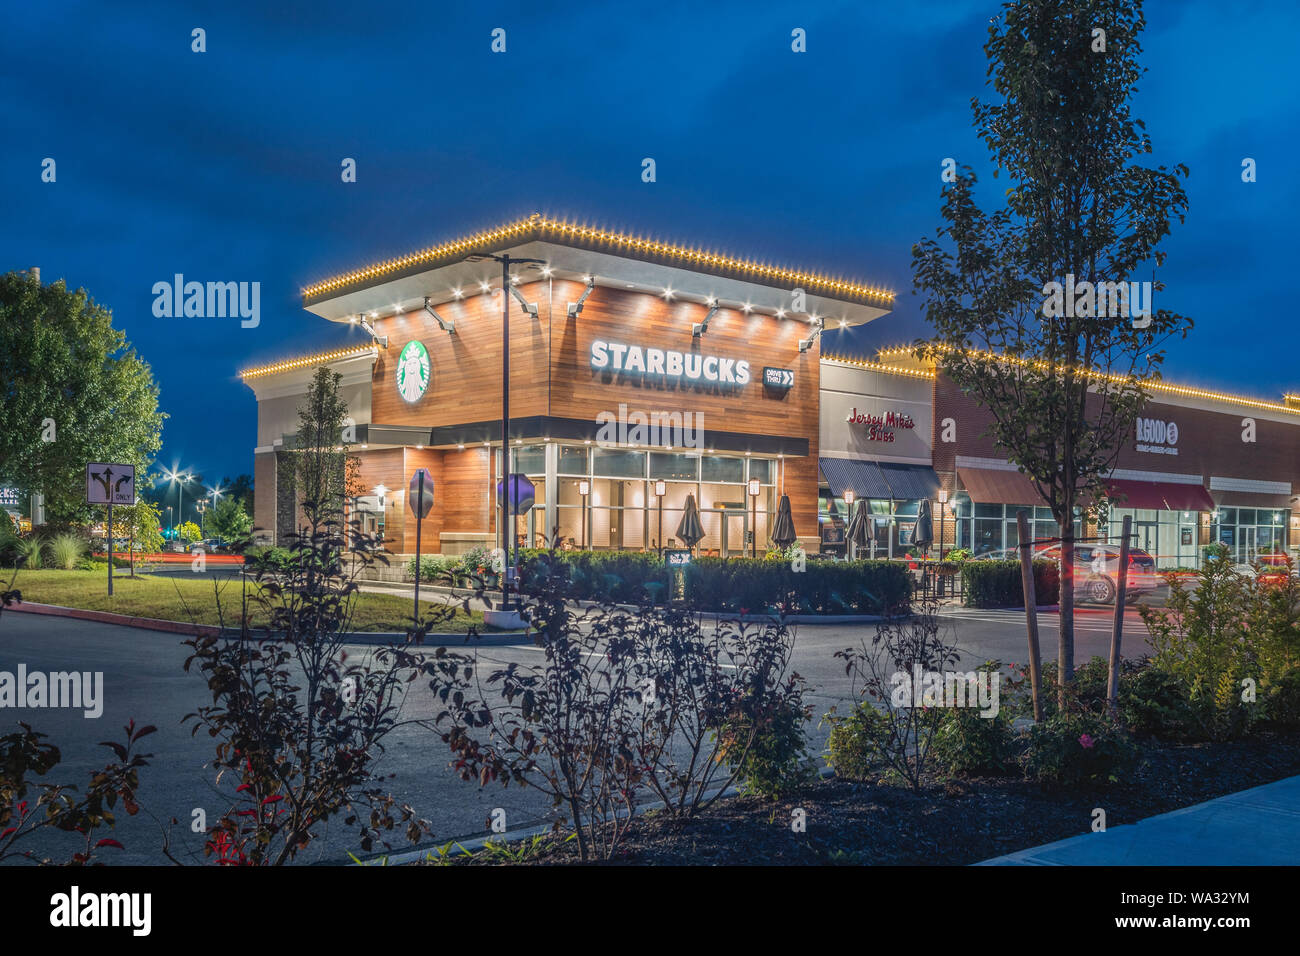 NEW HARTFORD, NEW YORK - AUG 16, 2019: Starbucks Coffee is an American chain of coffee shops, founded in Seattle. Stock Photo